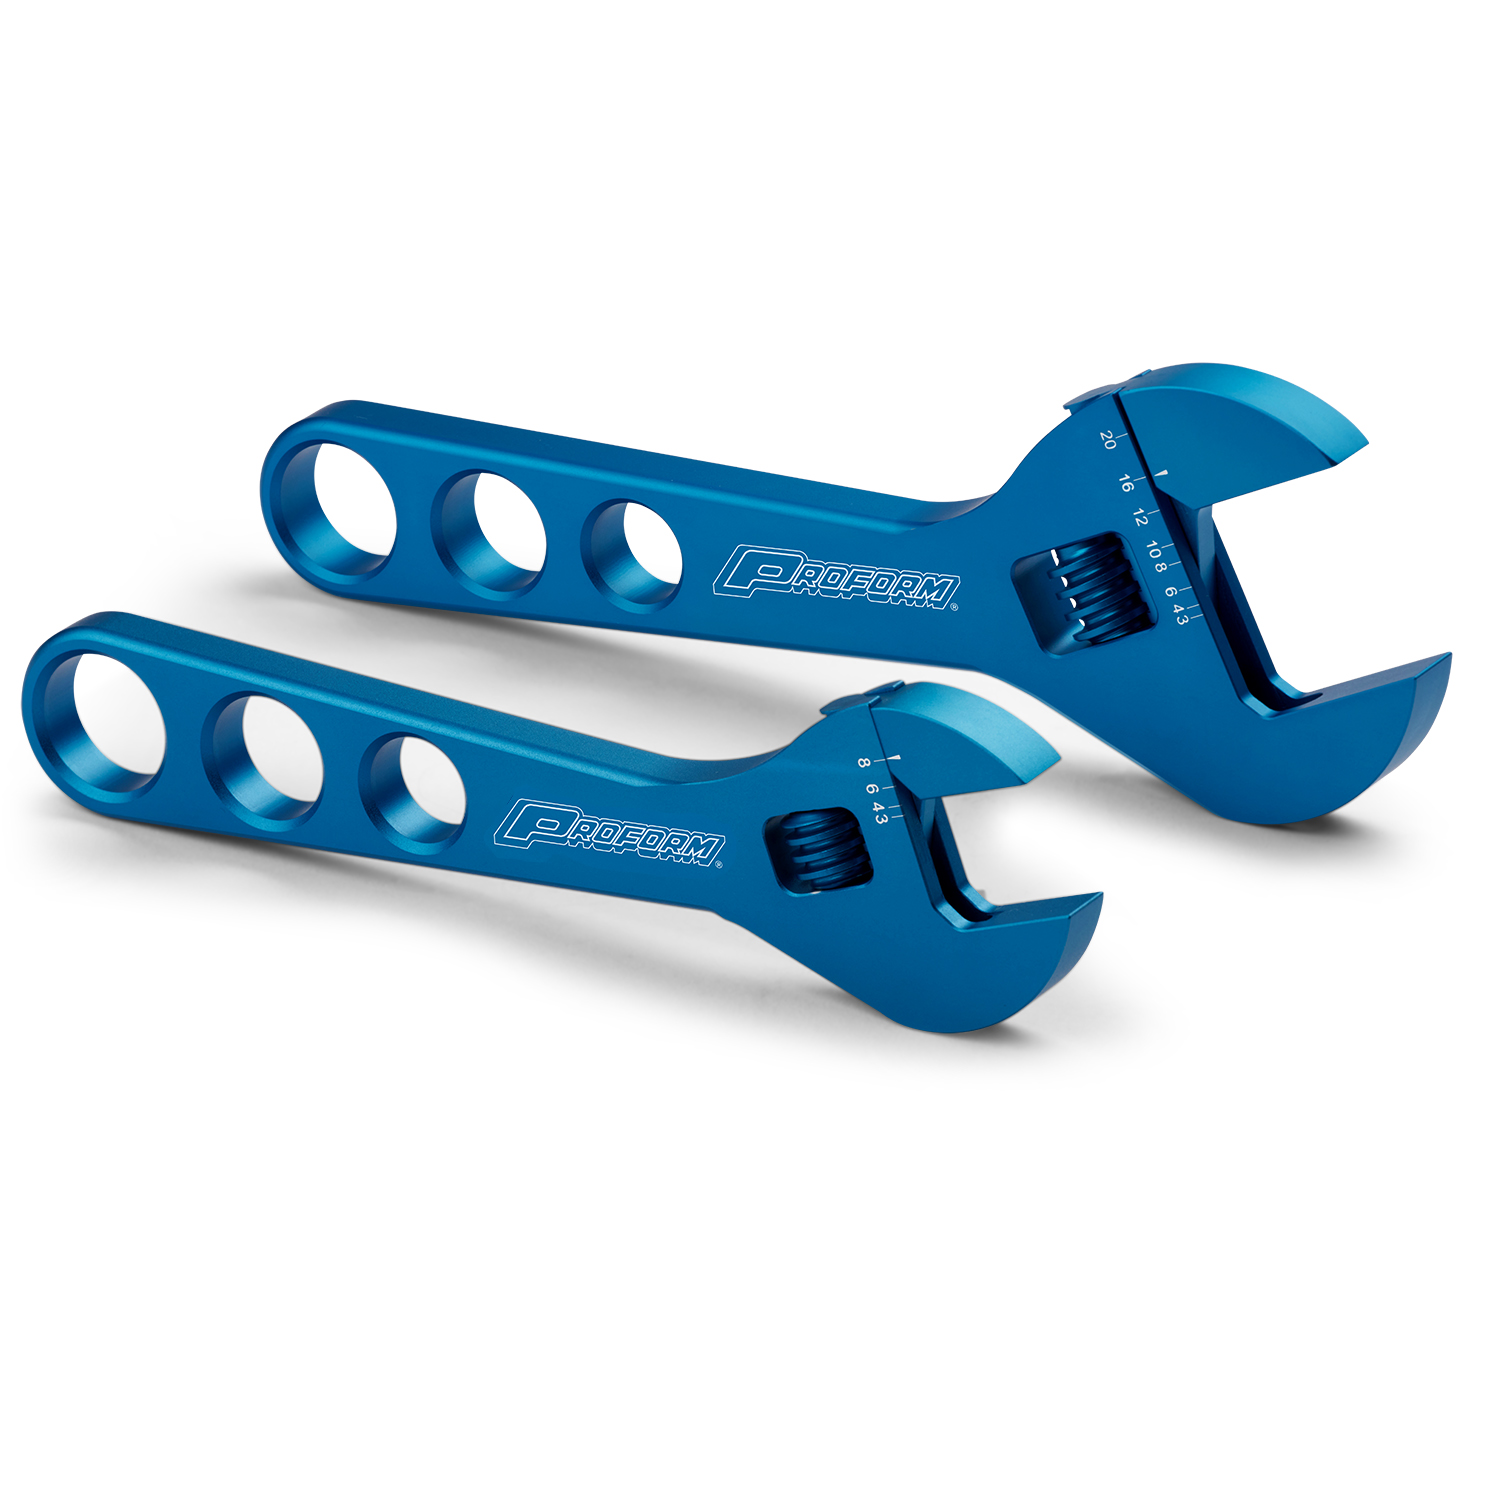 Proform 67729 Line Fitting Wrench Set